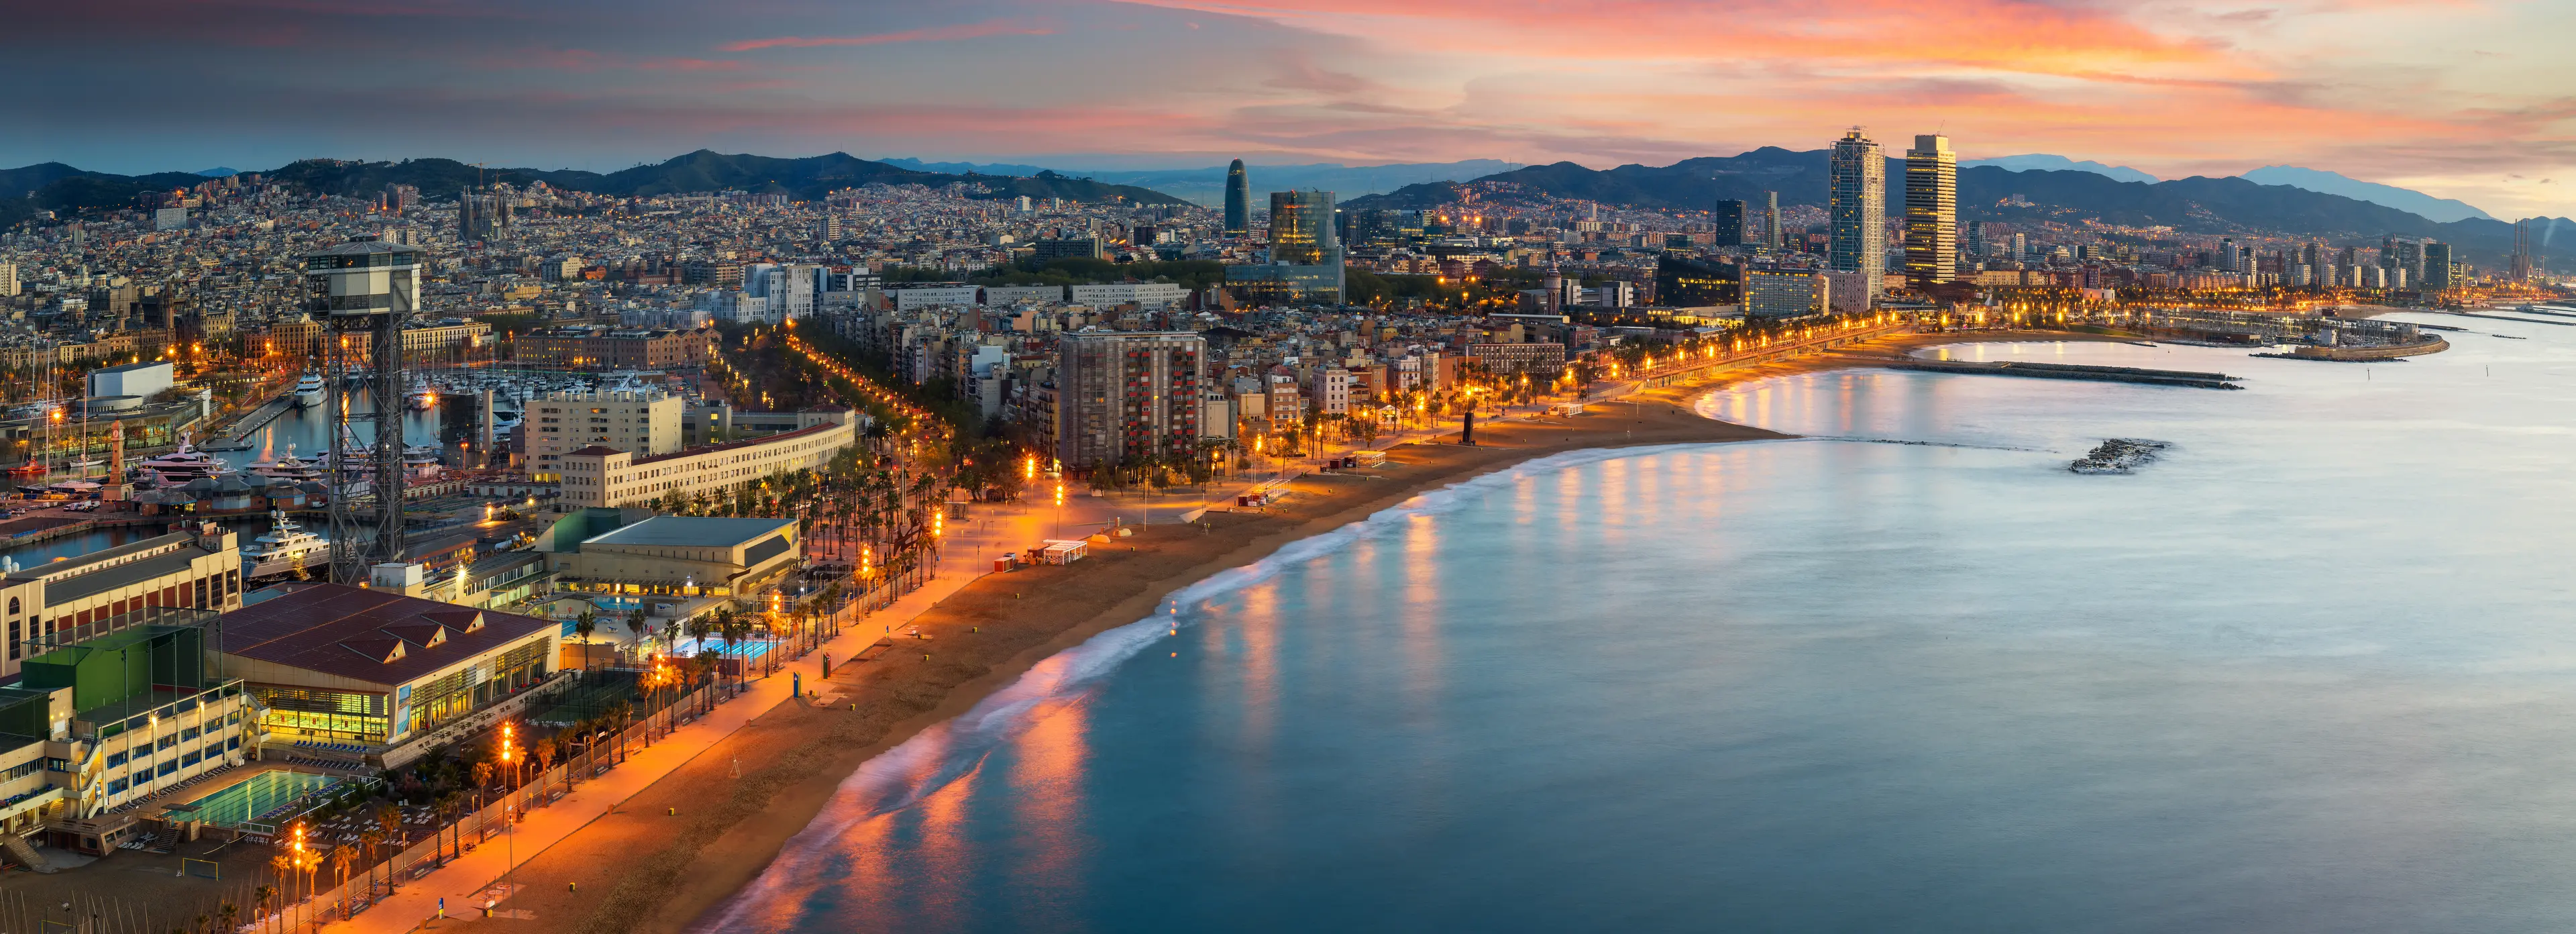 2-Day Barcelona Trip: Shop, Sip and Savor Spanish Delights